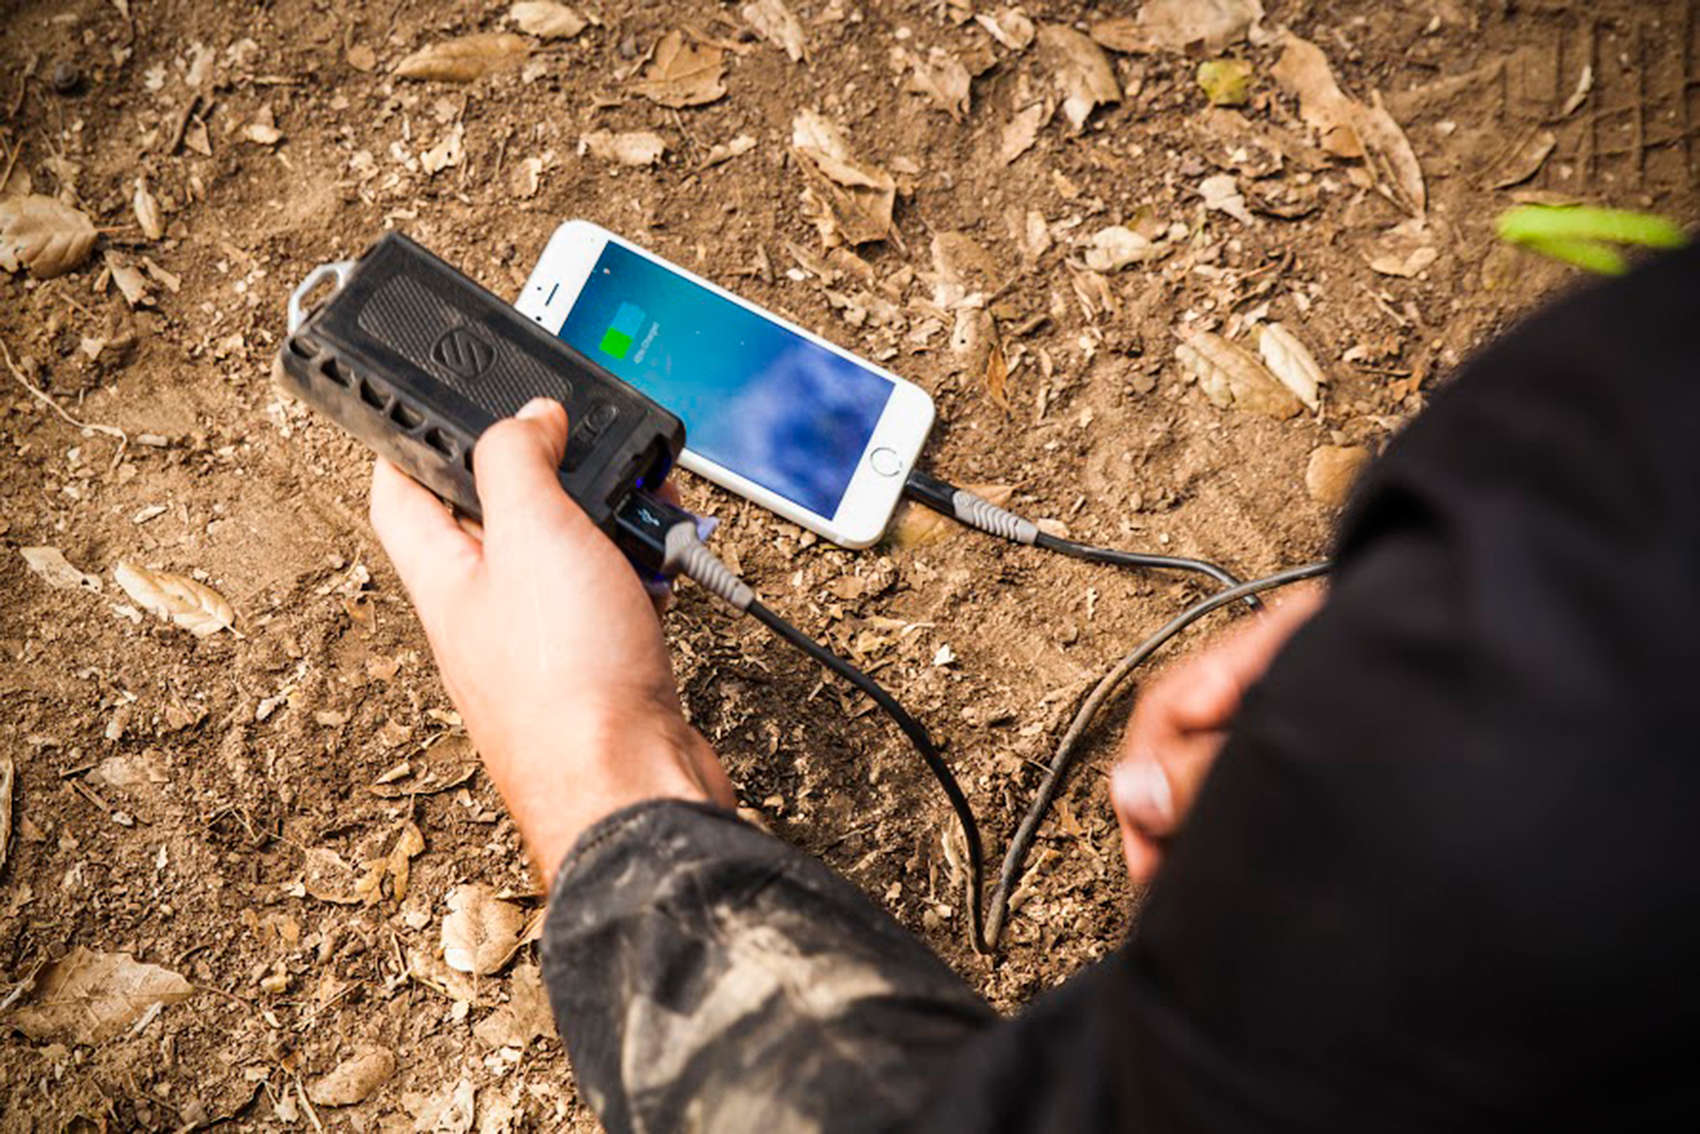 The goBAT 6000 can charge your smartphone up to three times during your outdoor adventures.